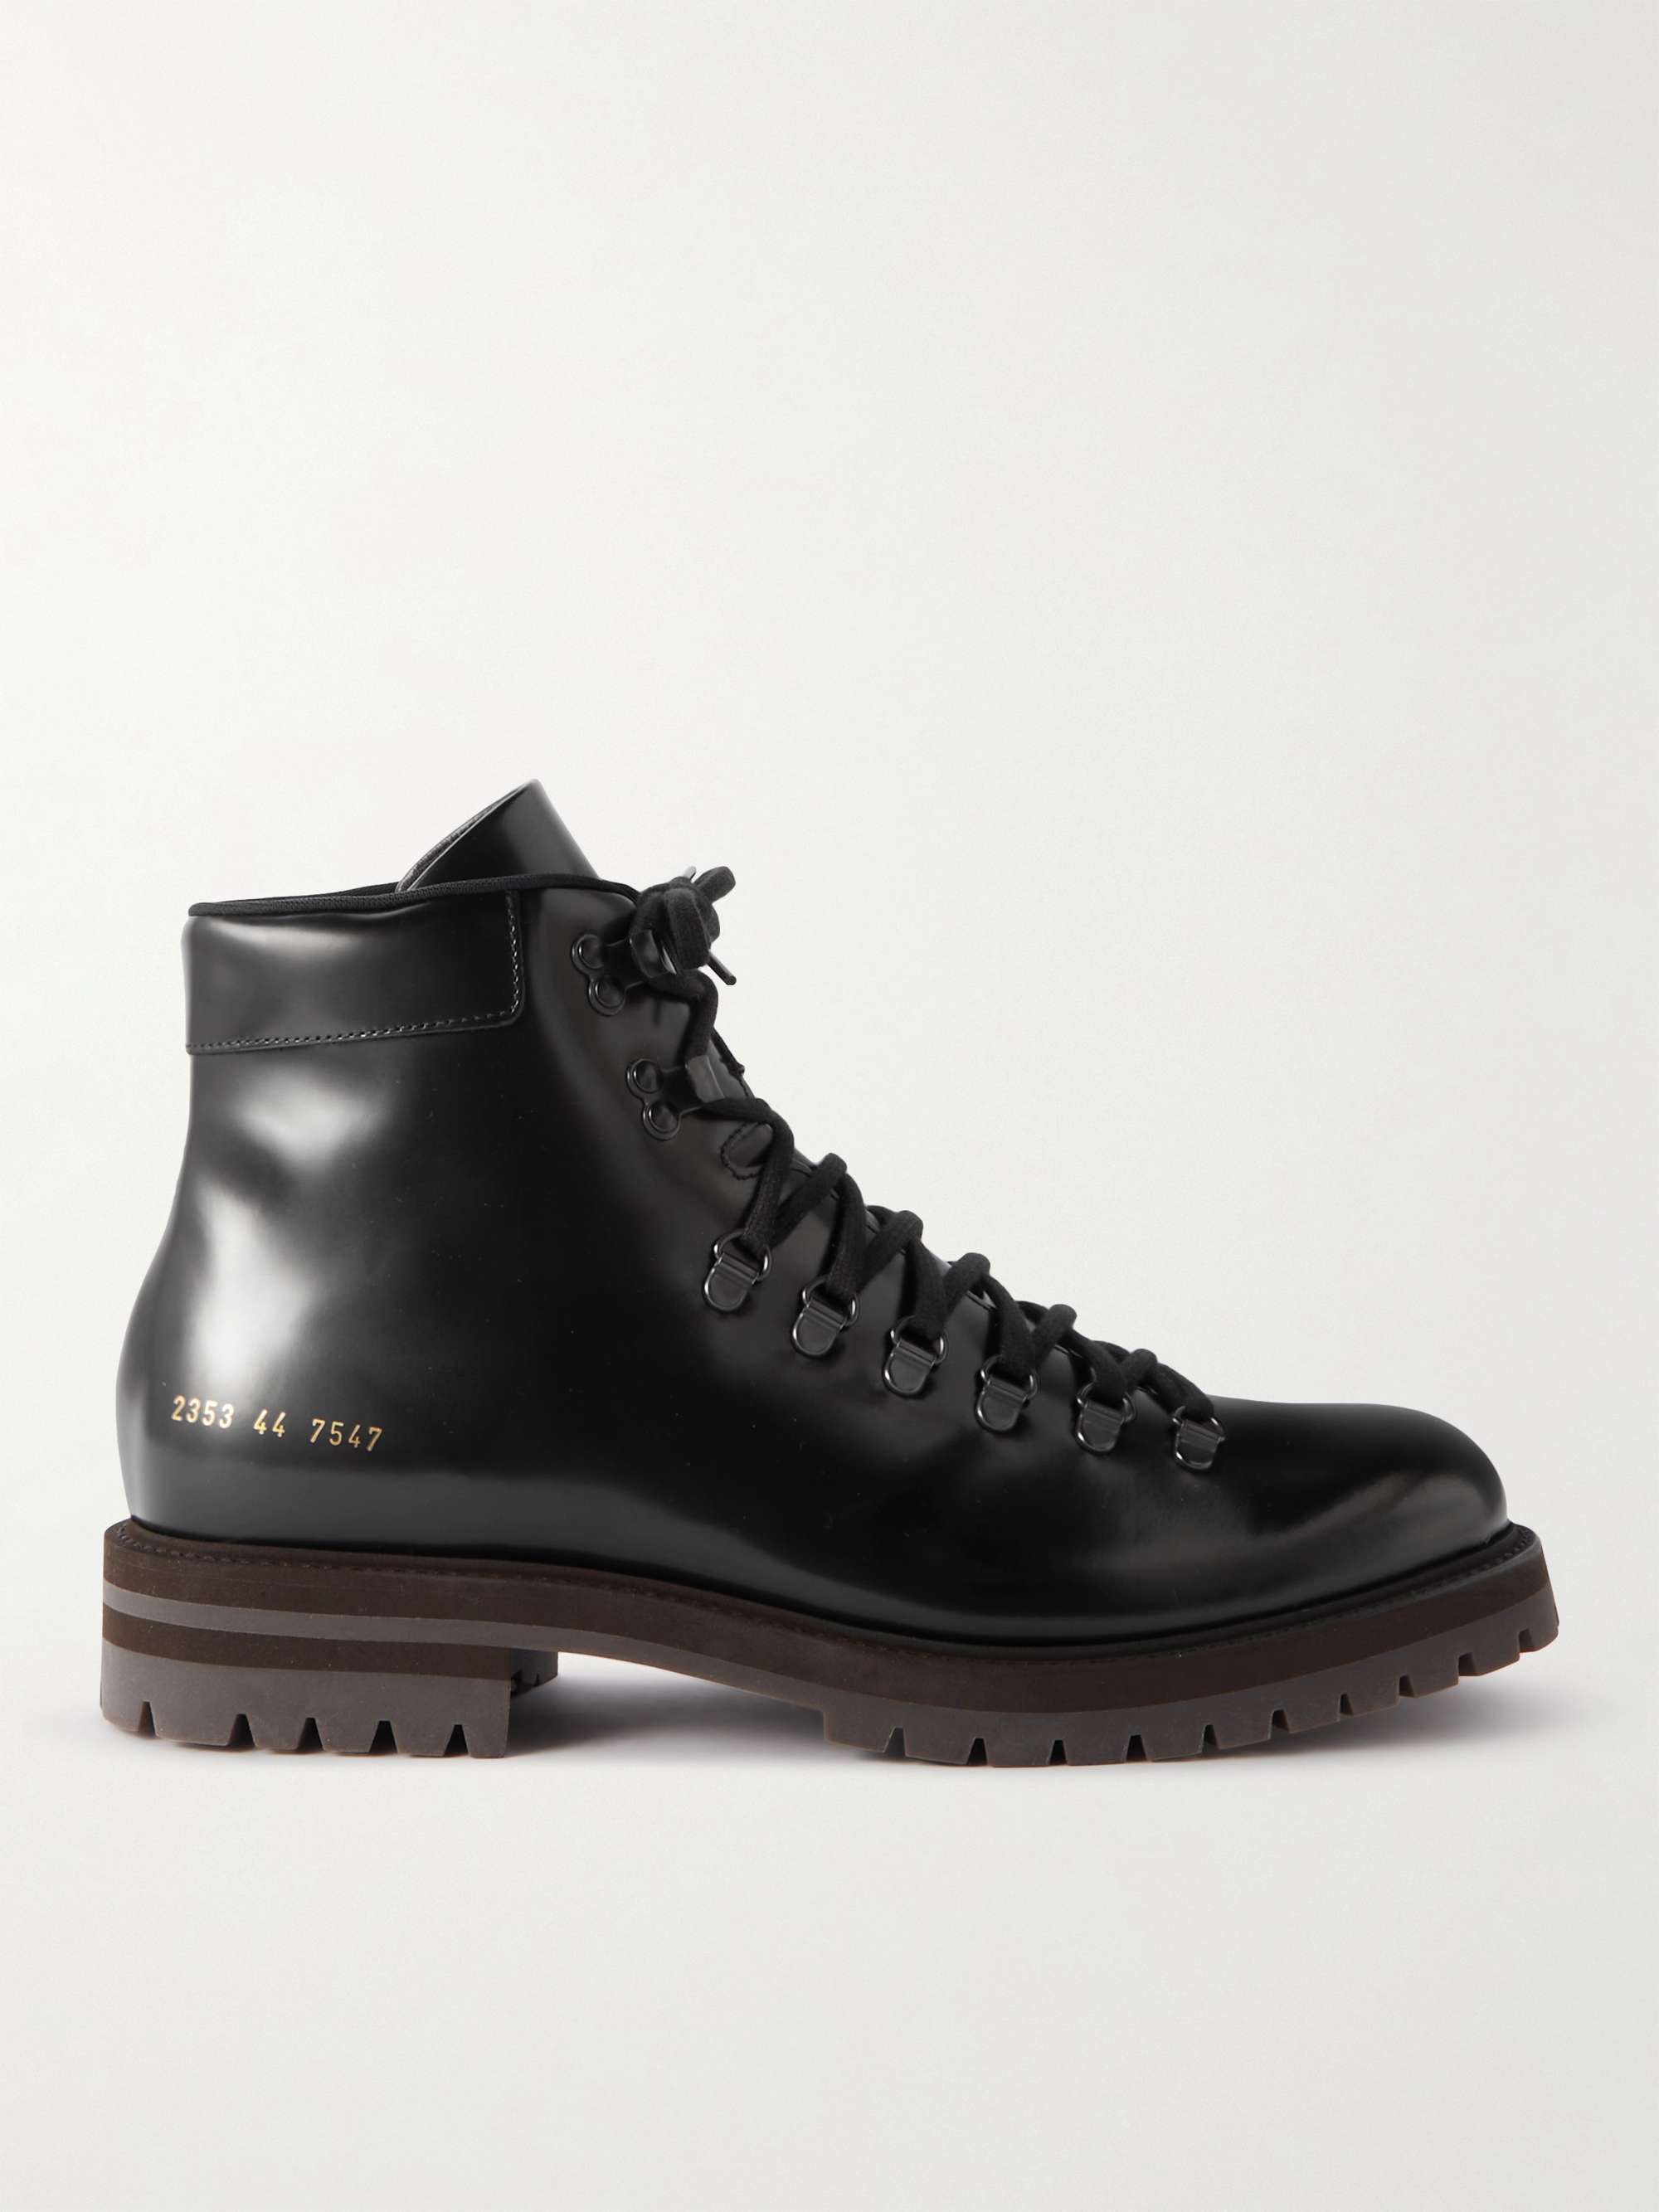 Black Leather Boots | COMMON PROJECTS | MR PORTER